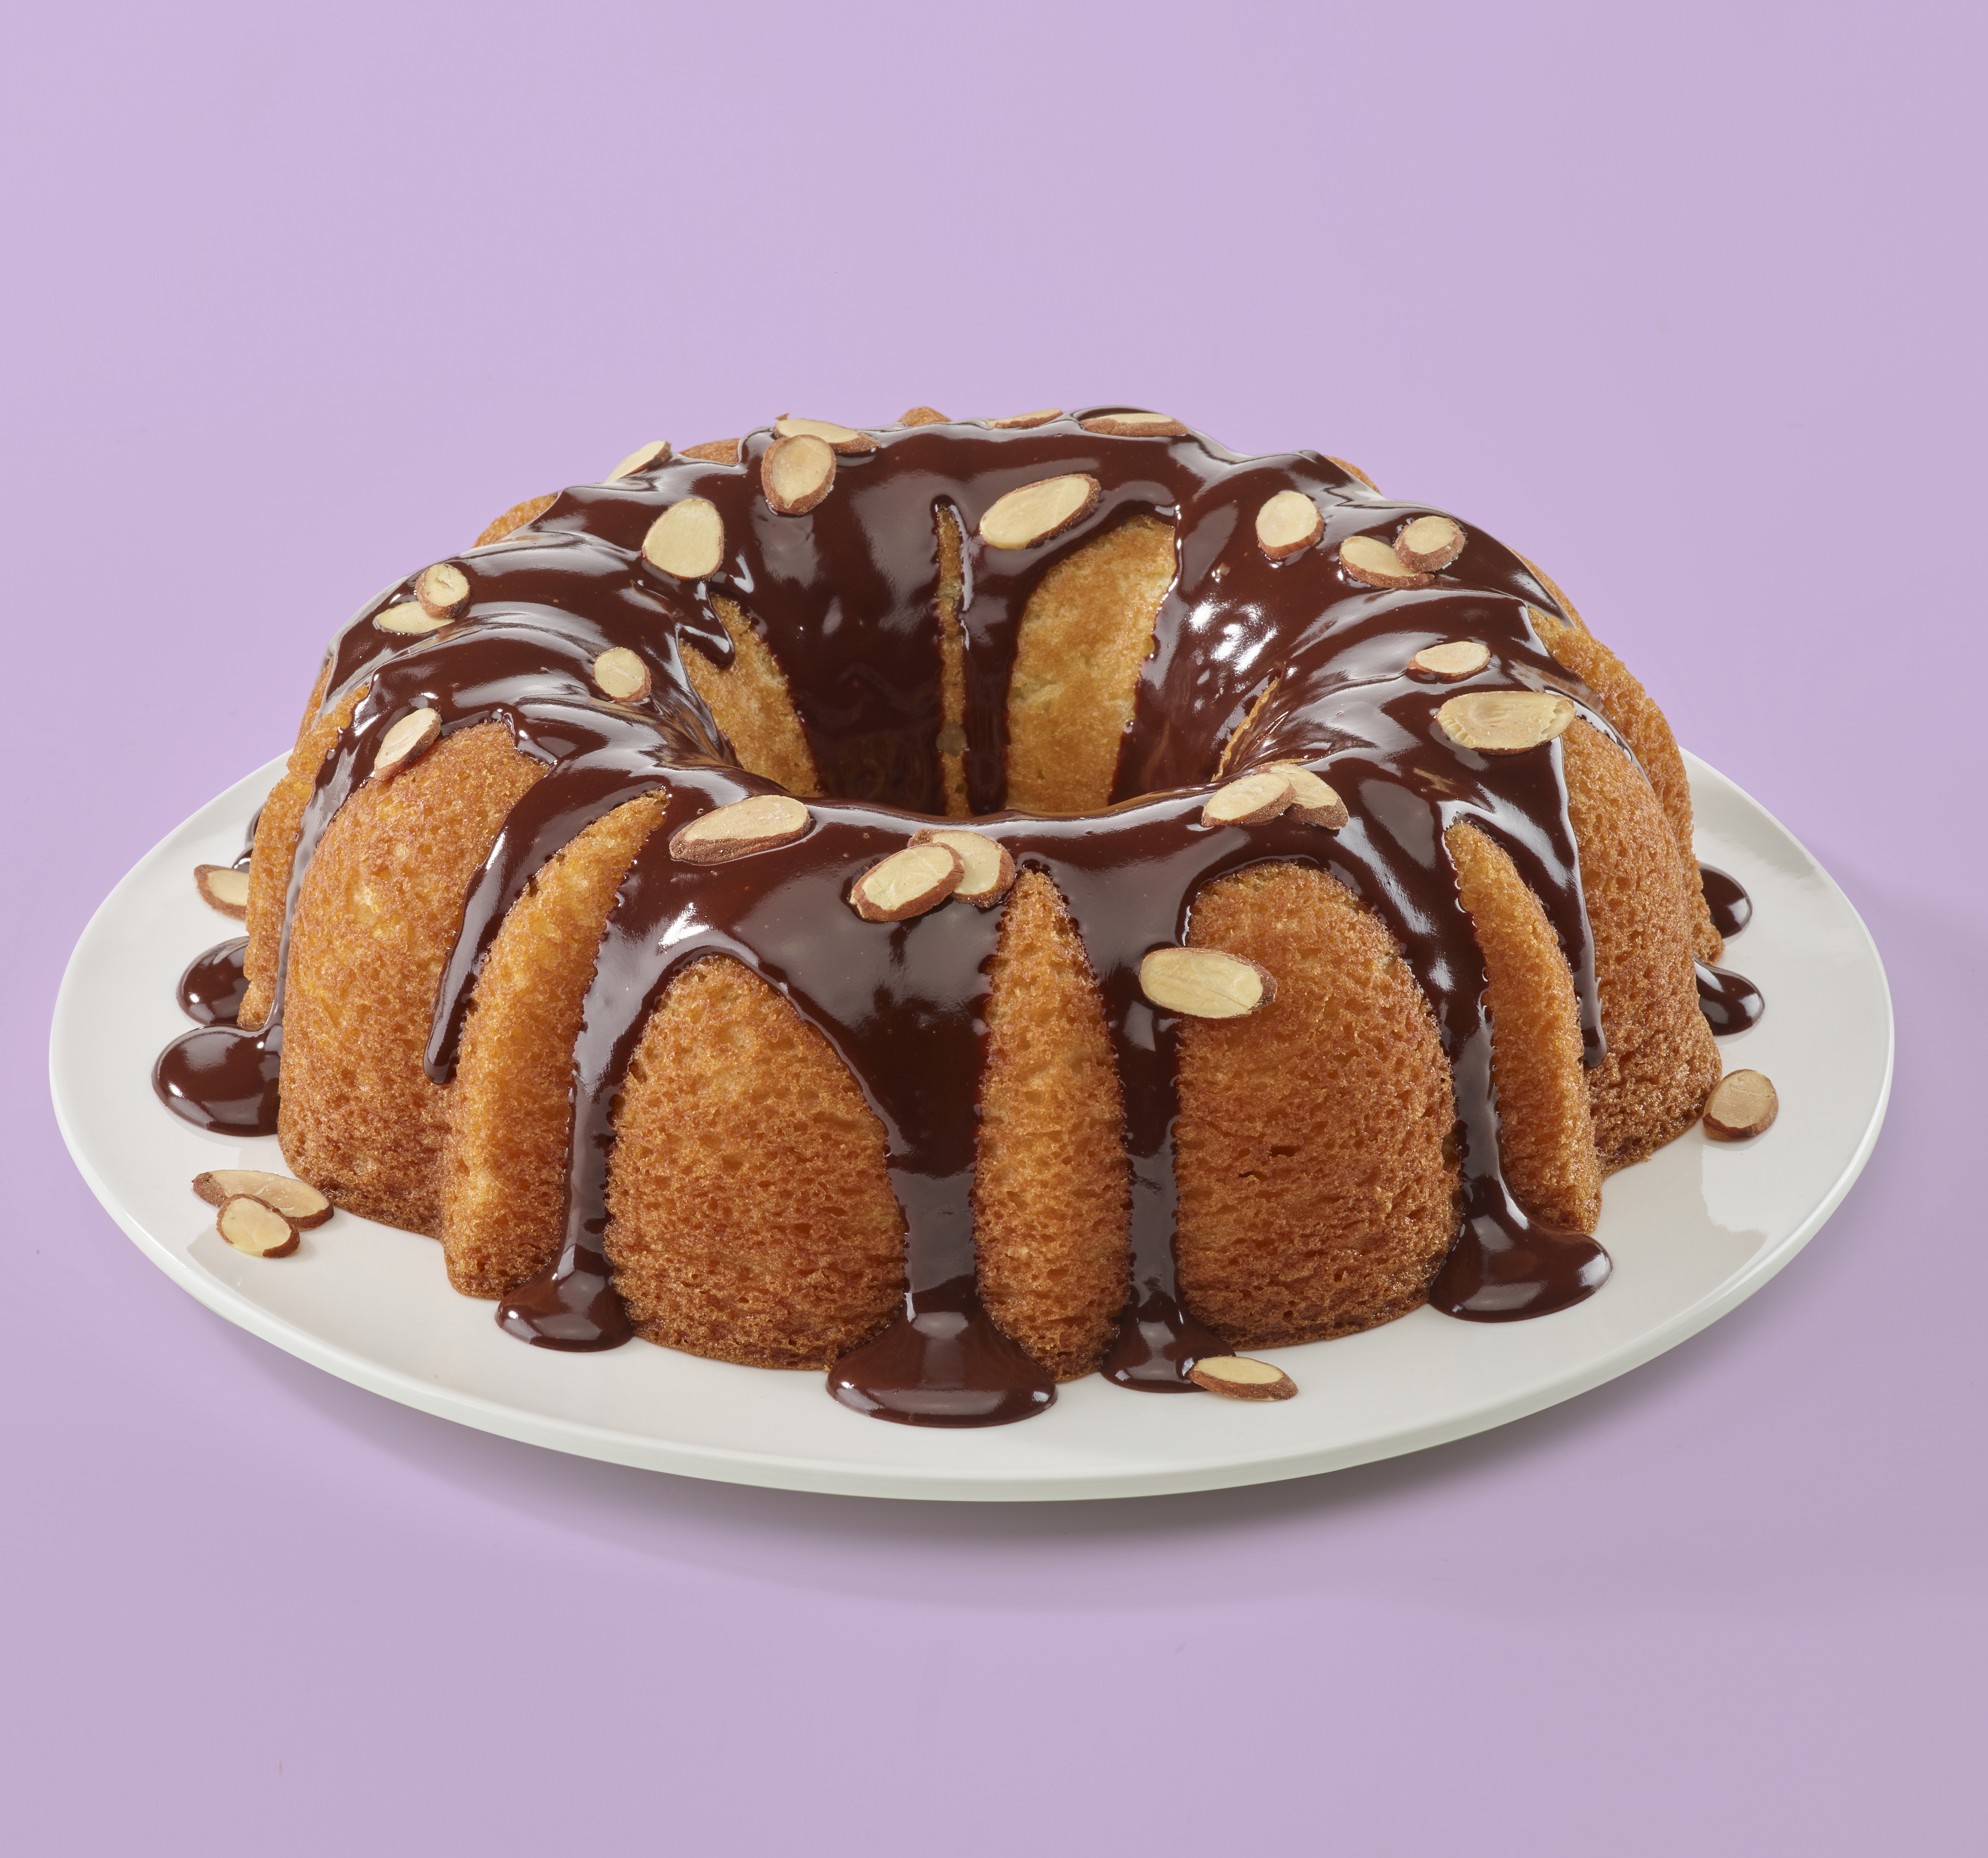 Almond Bundt Cake with Chocolate Drizzle & Toasted Almonds Recipe